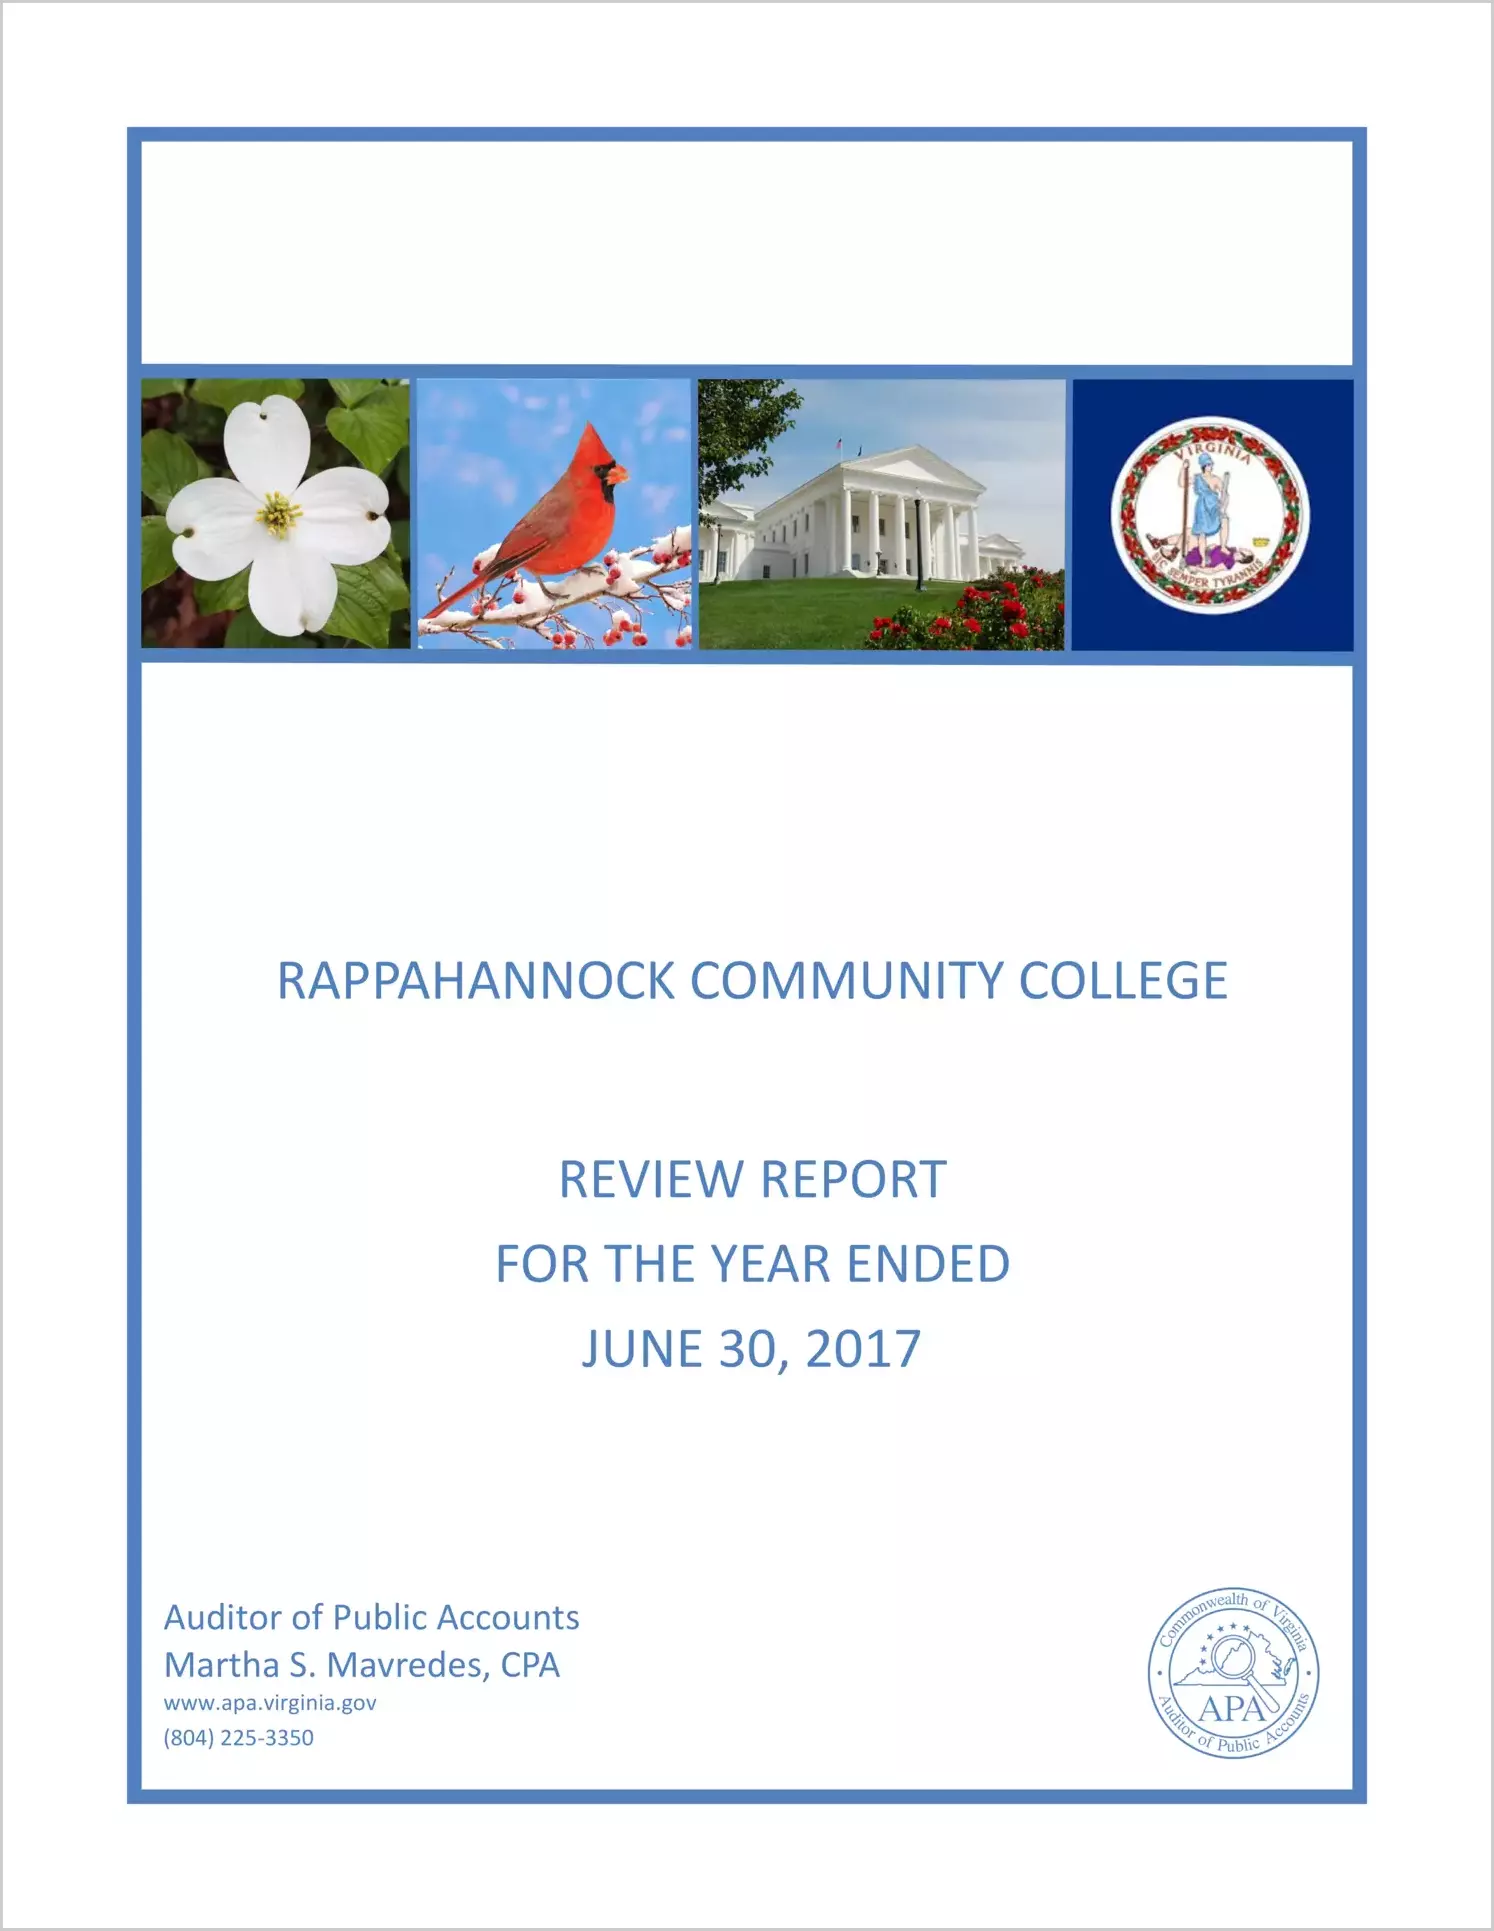 Rappahannock Community College Review for the year ended June 30, 2017